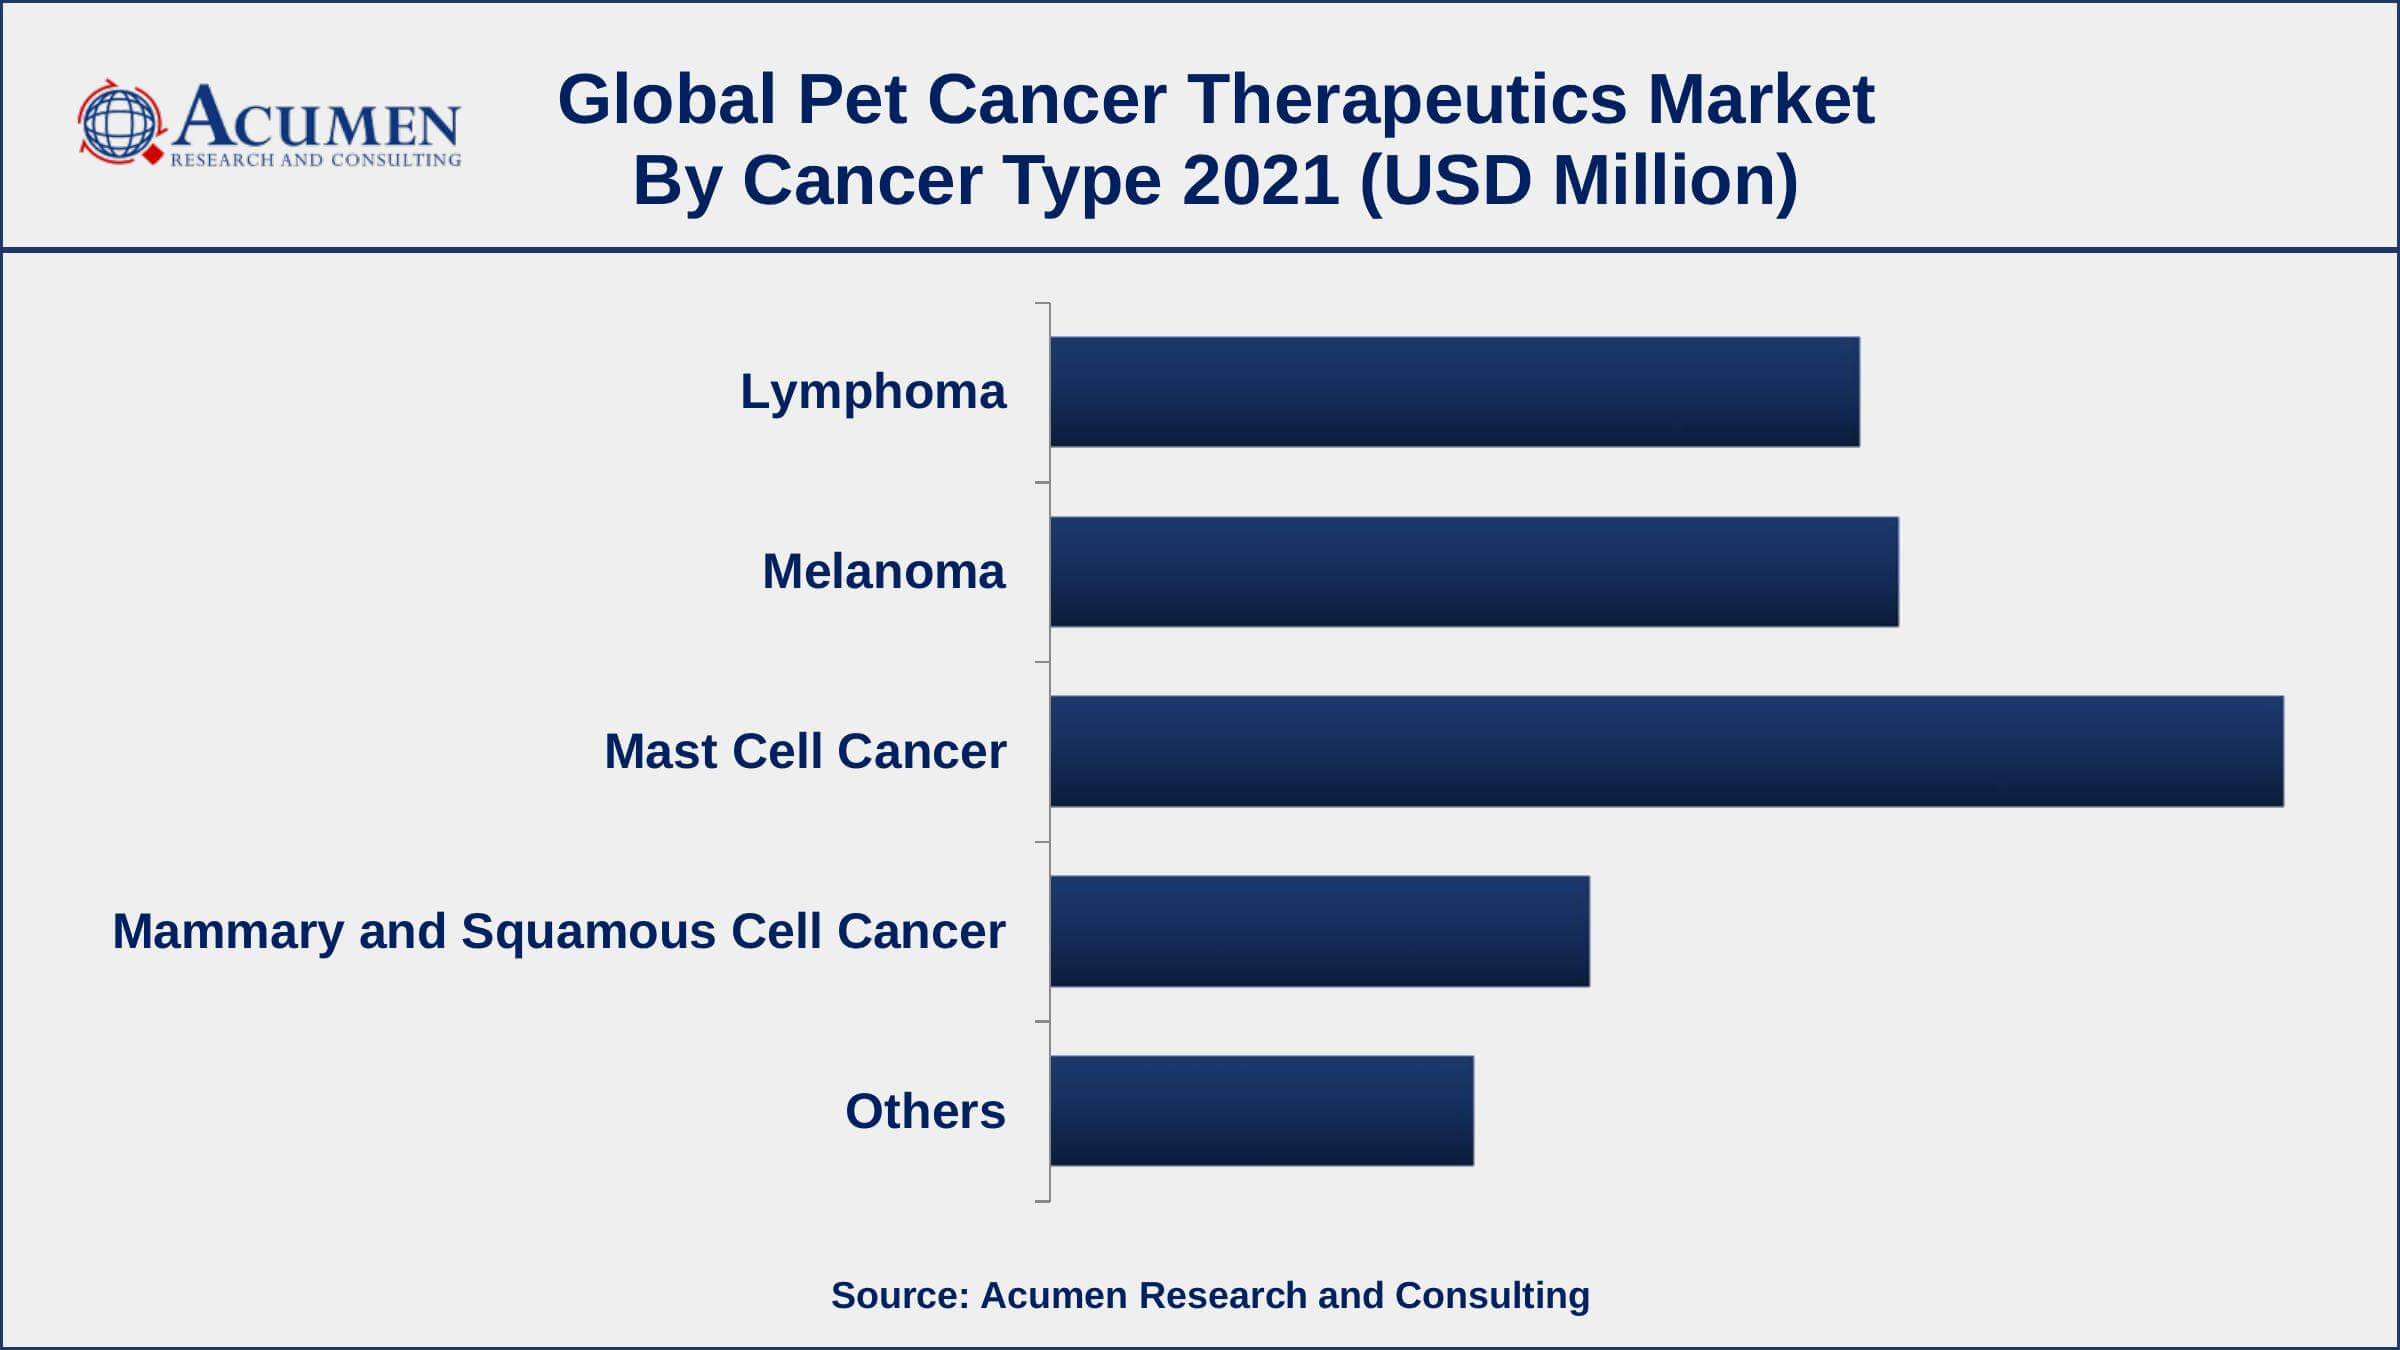 Growing awareness of pet diseases among pet owners, drives the pet cancer therapeutics market size